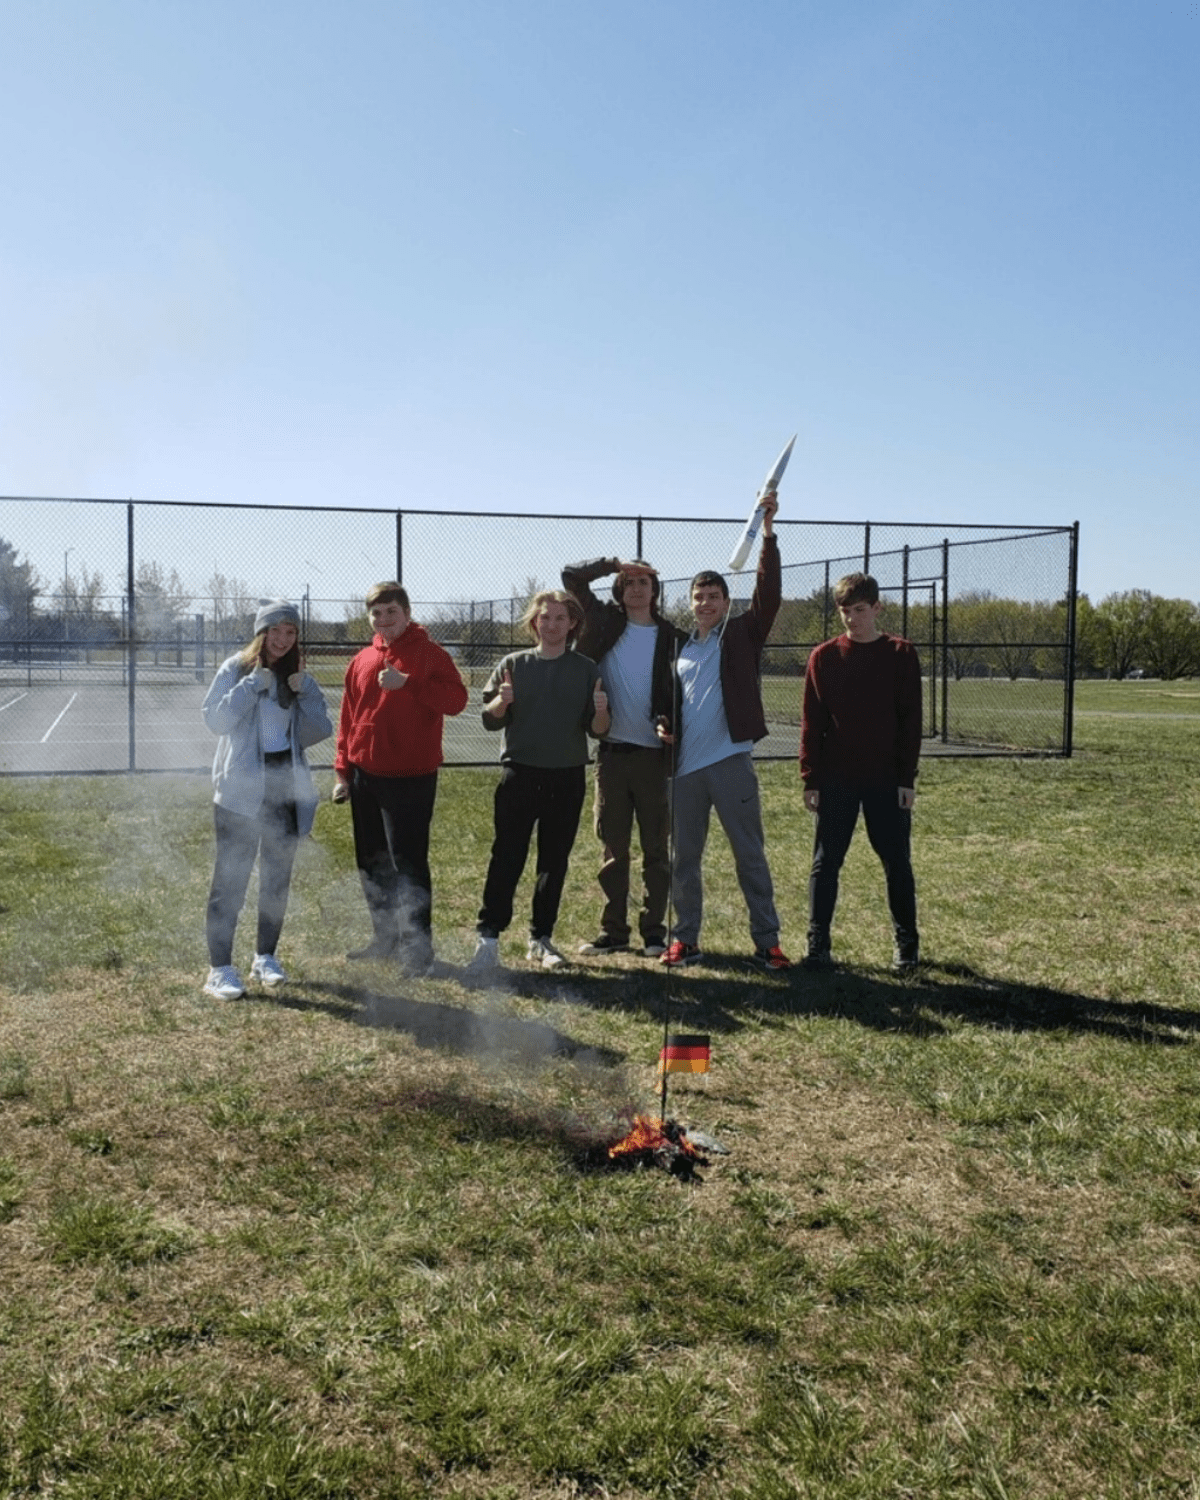 Not every launch goes as planned. Jacob Zahabi (second from right) holds the top end of a rocket that blew up on ignition and left a small fire. (Photo: Jacob Zahabi)